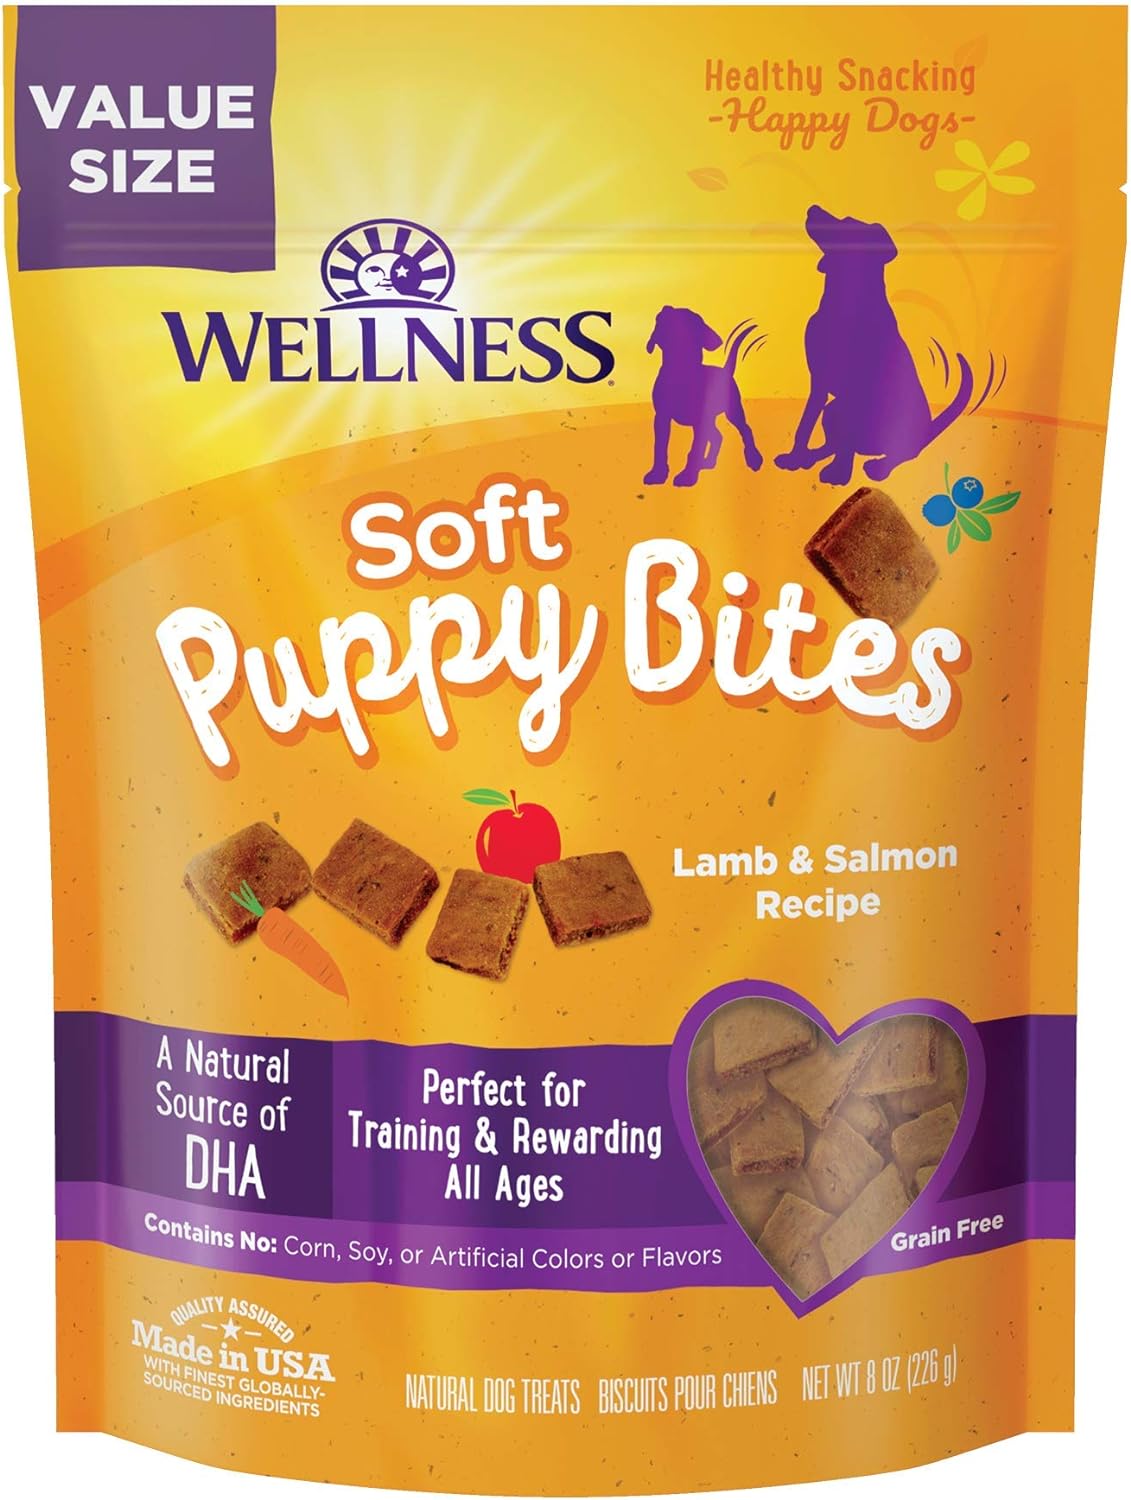 Wellness Soft Puppy Bites Natural Grain-Free Treats for Training, Dog Treats with Real Meat and DHA, No Artificial Flavors (Lamb  Salmon, 8-Ounce Bag)